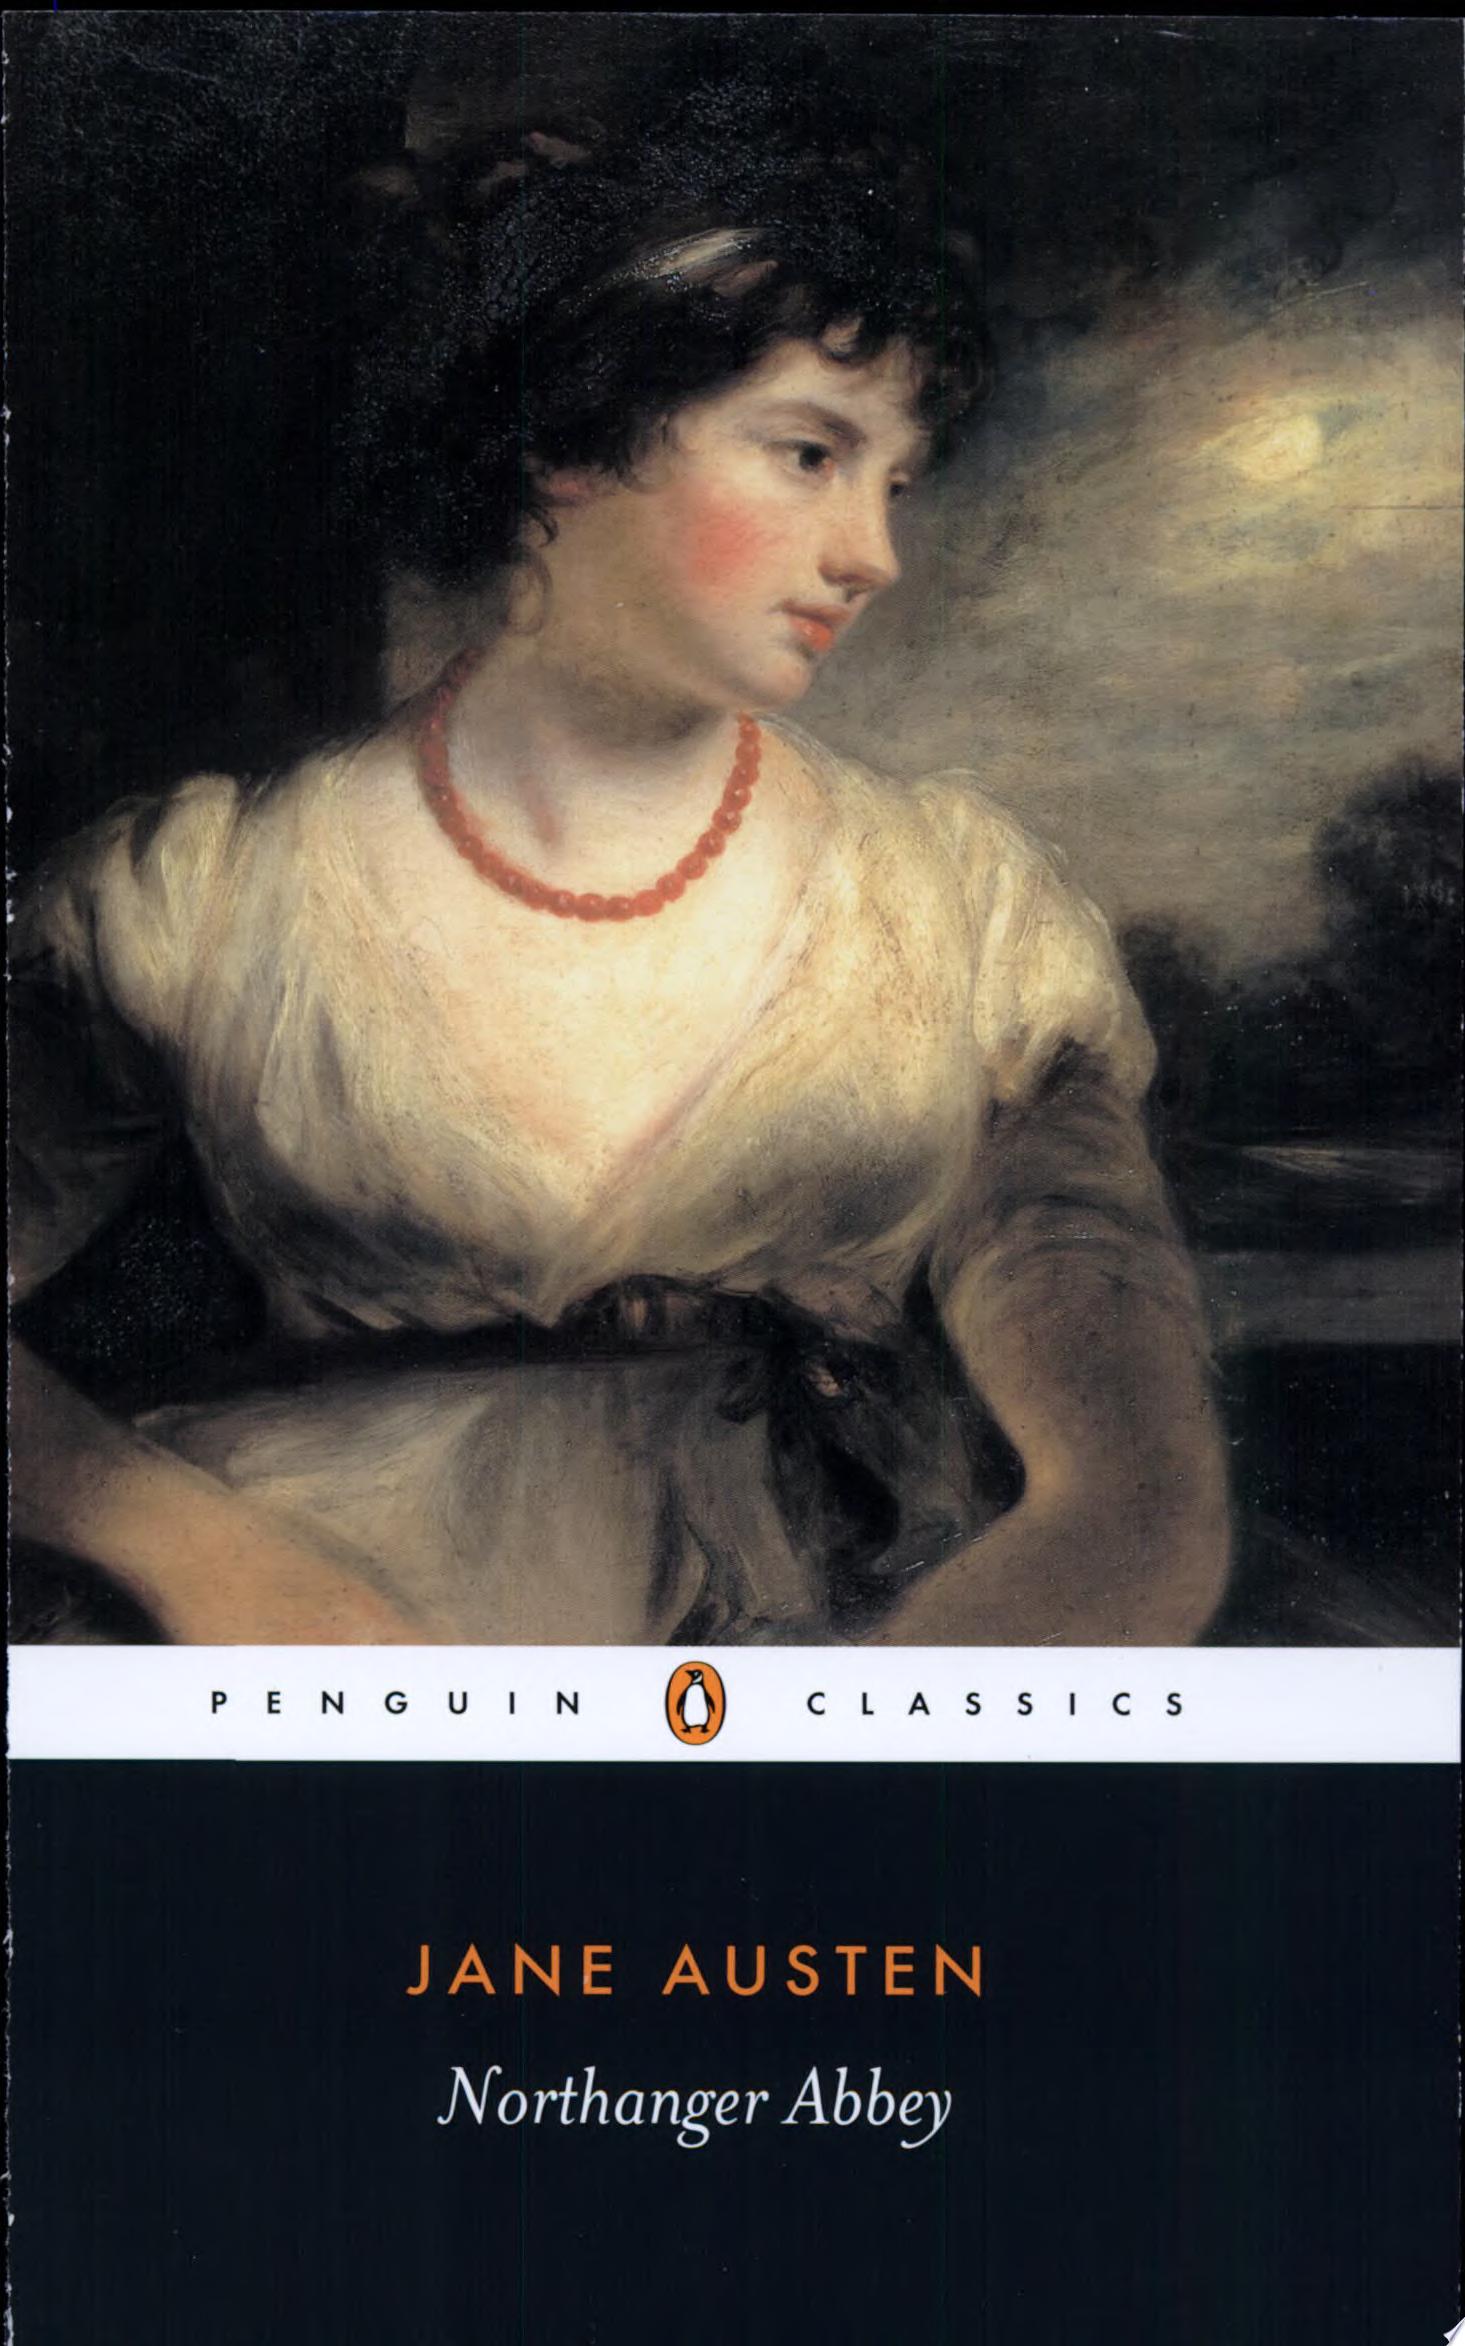 Image for "Northanger Abbey"